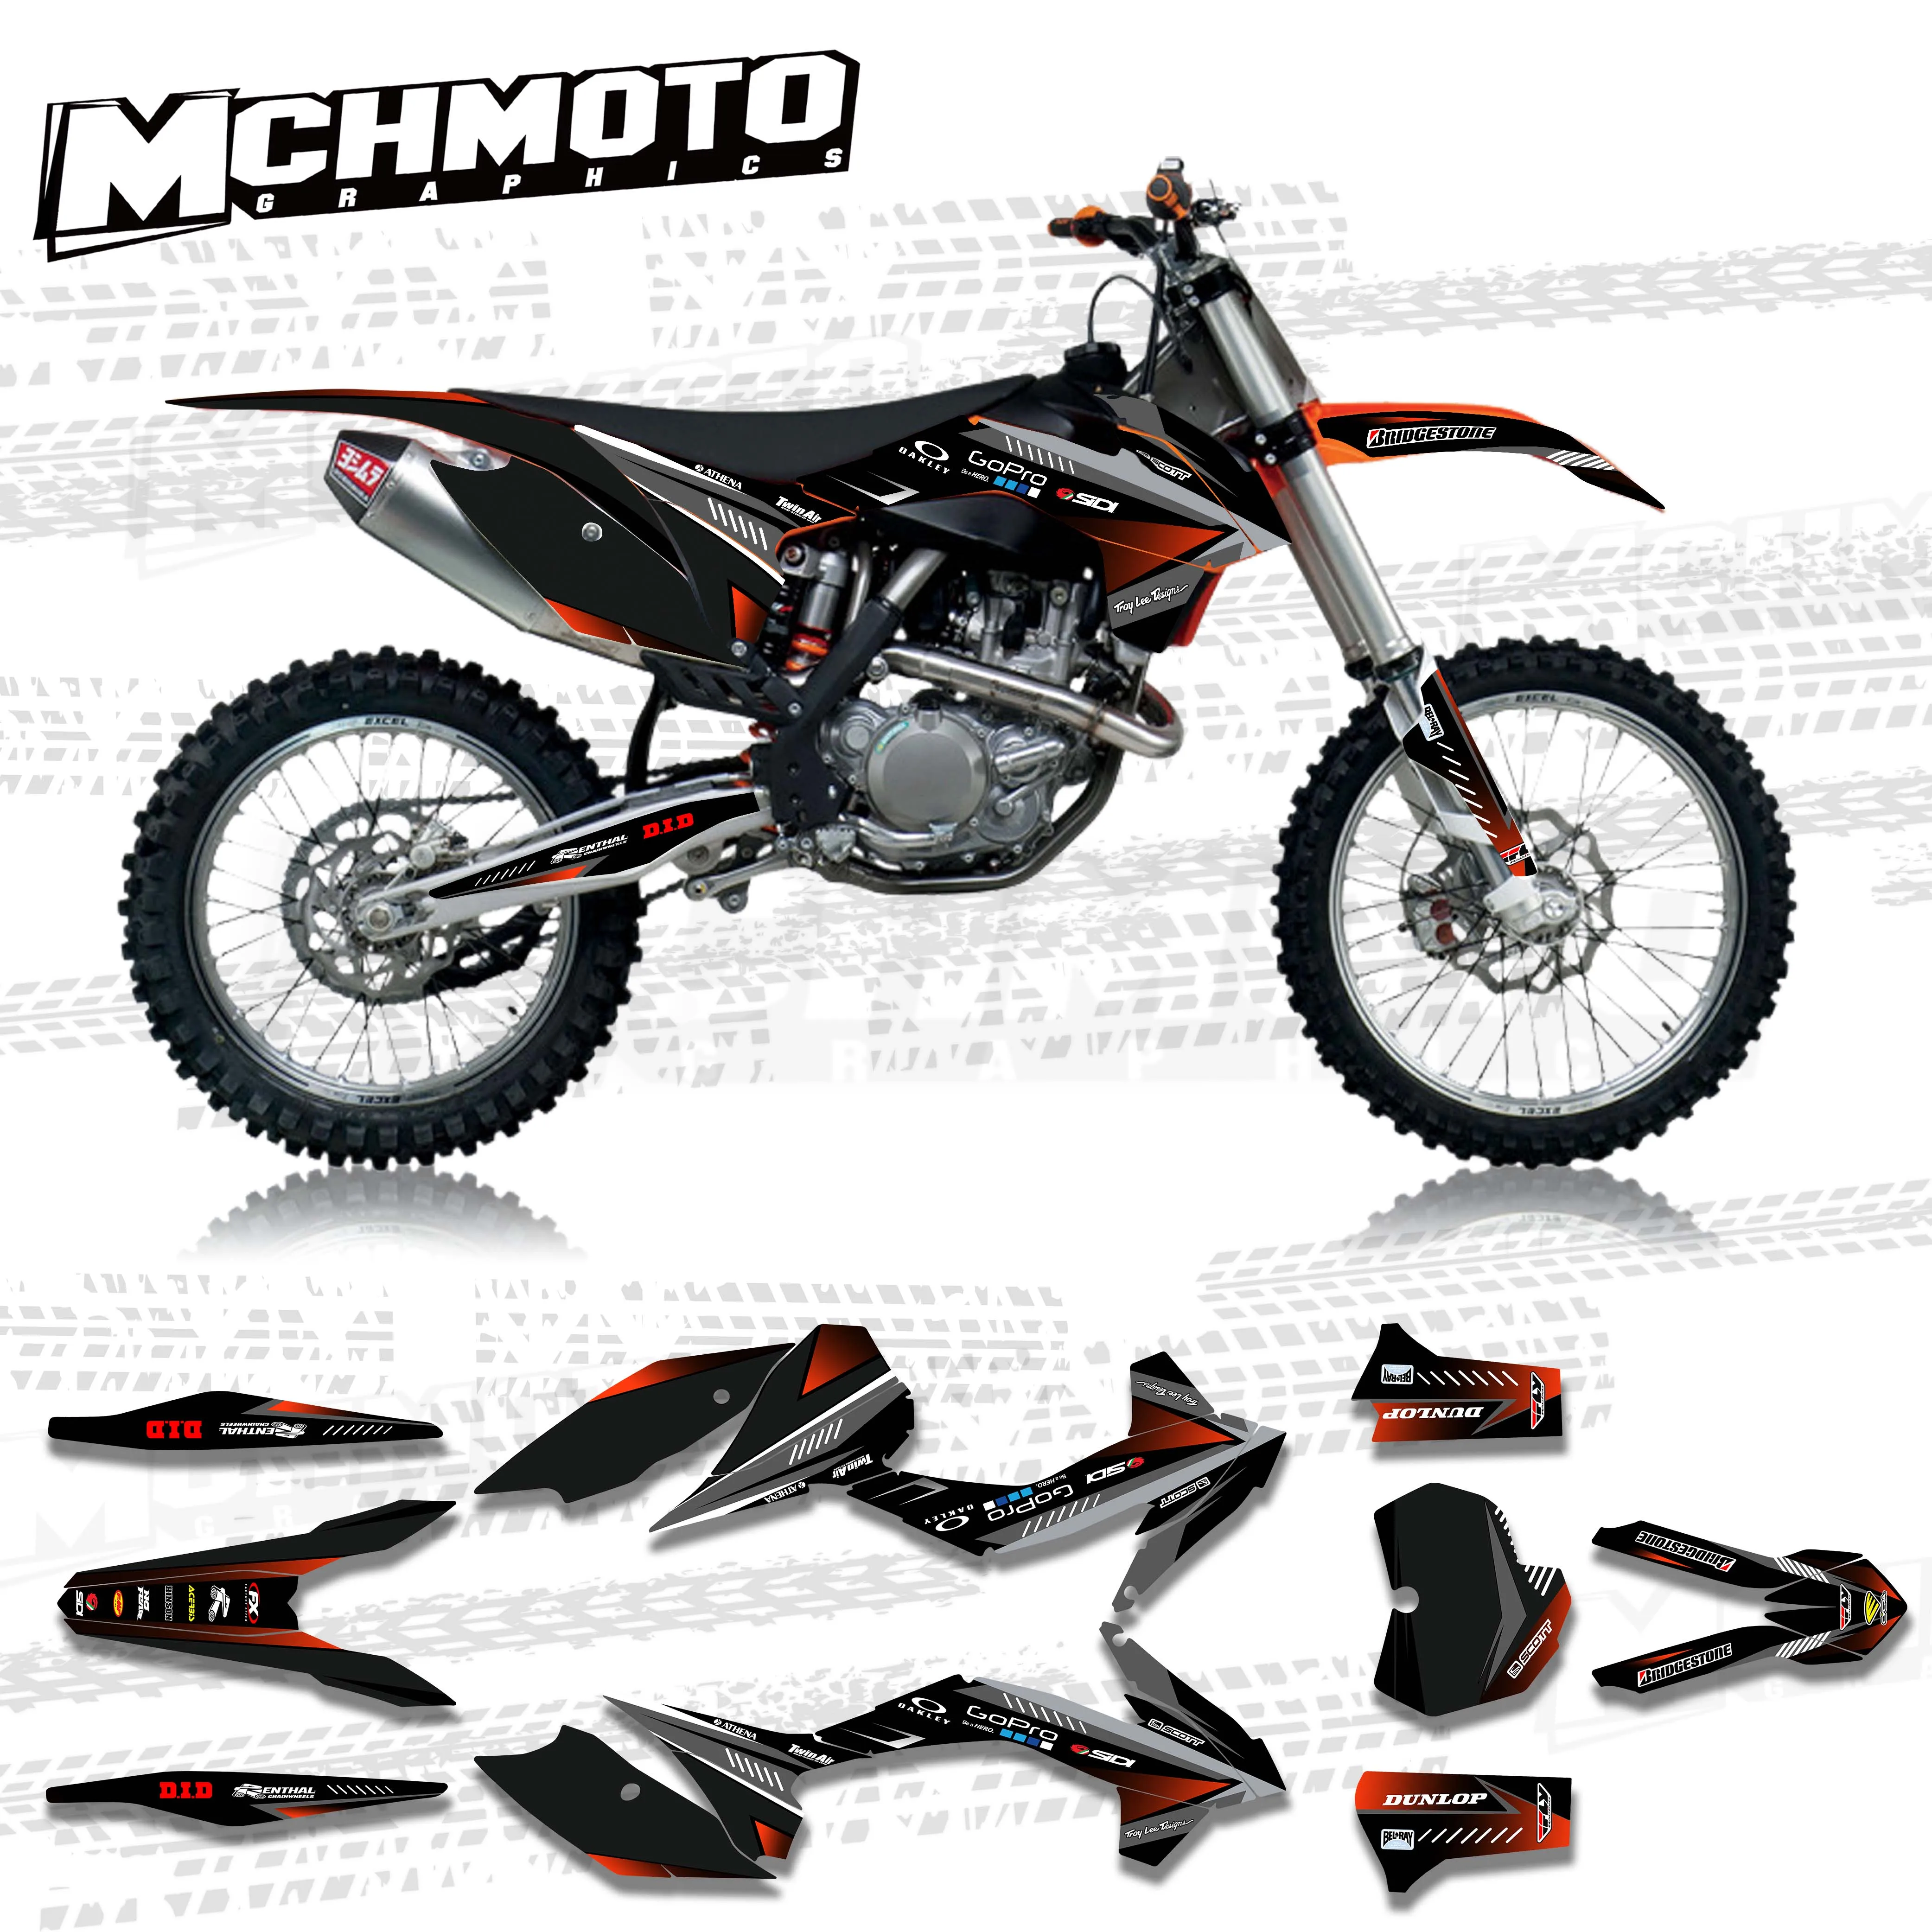 MCHMFGFull Graphics Decals Stickers Motorcycle Background Custom Number Name For KTM EXC SXF 125 250 300 350 450 2014 2015 201